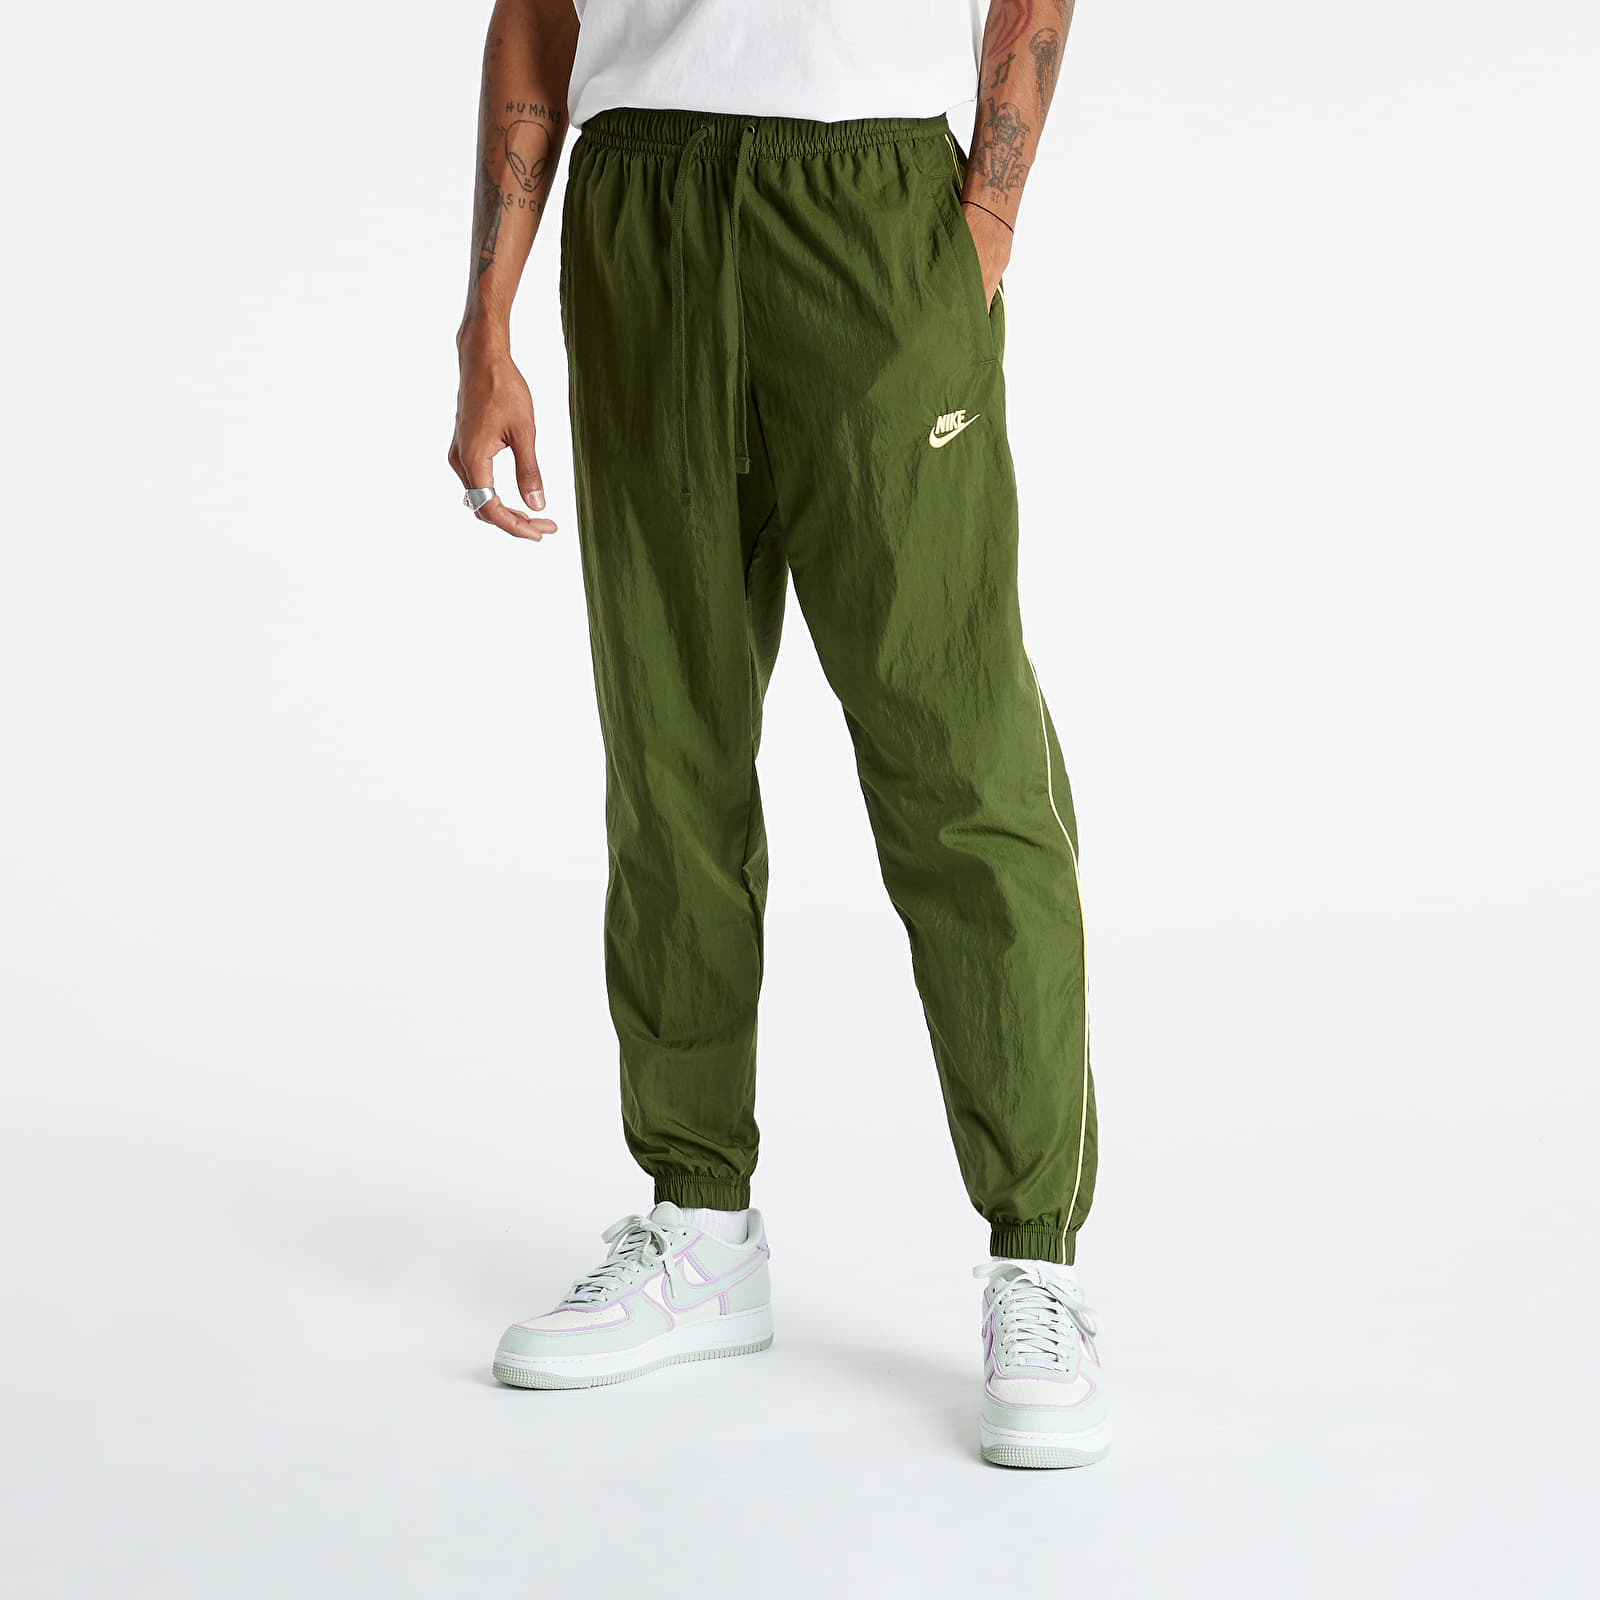 Nike Men's Classic Nylon Track Athletic Pants Army Green/Neon Size